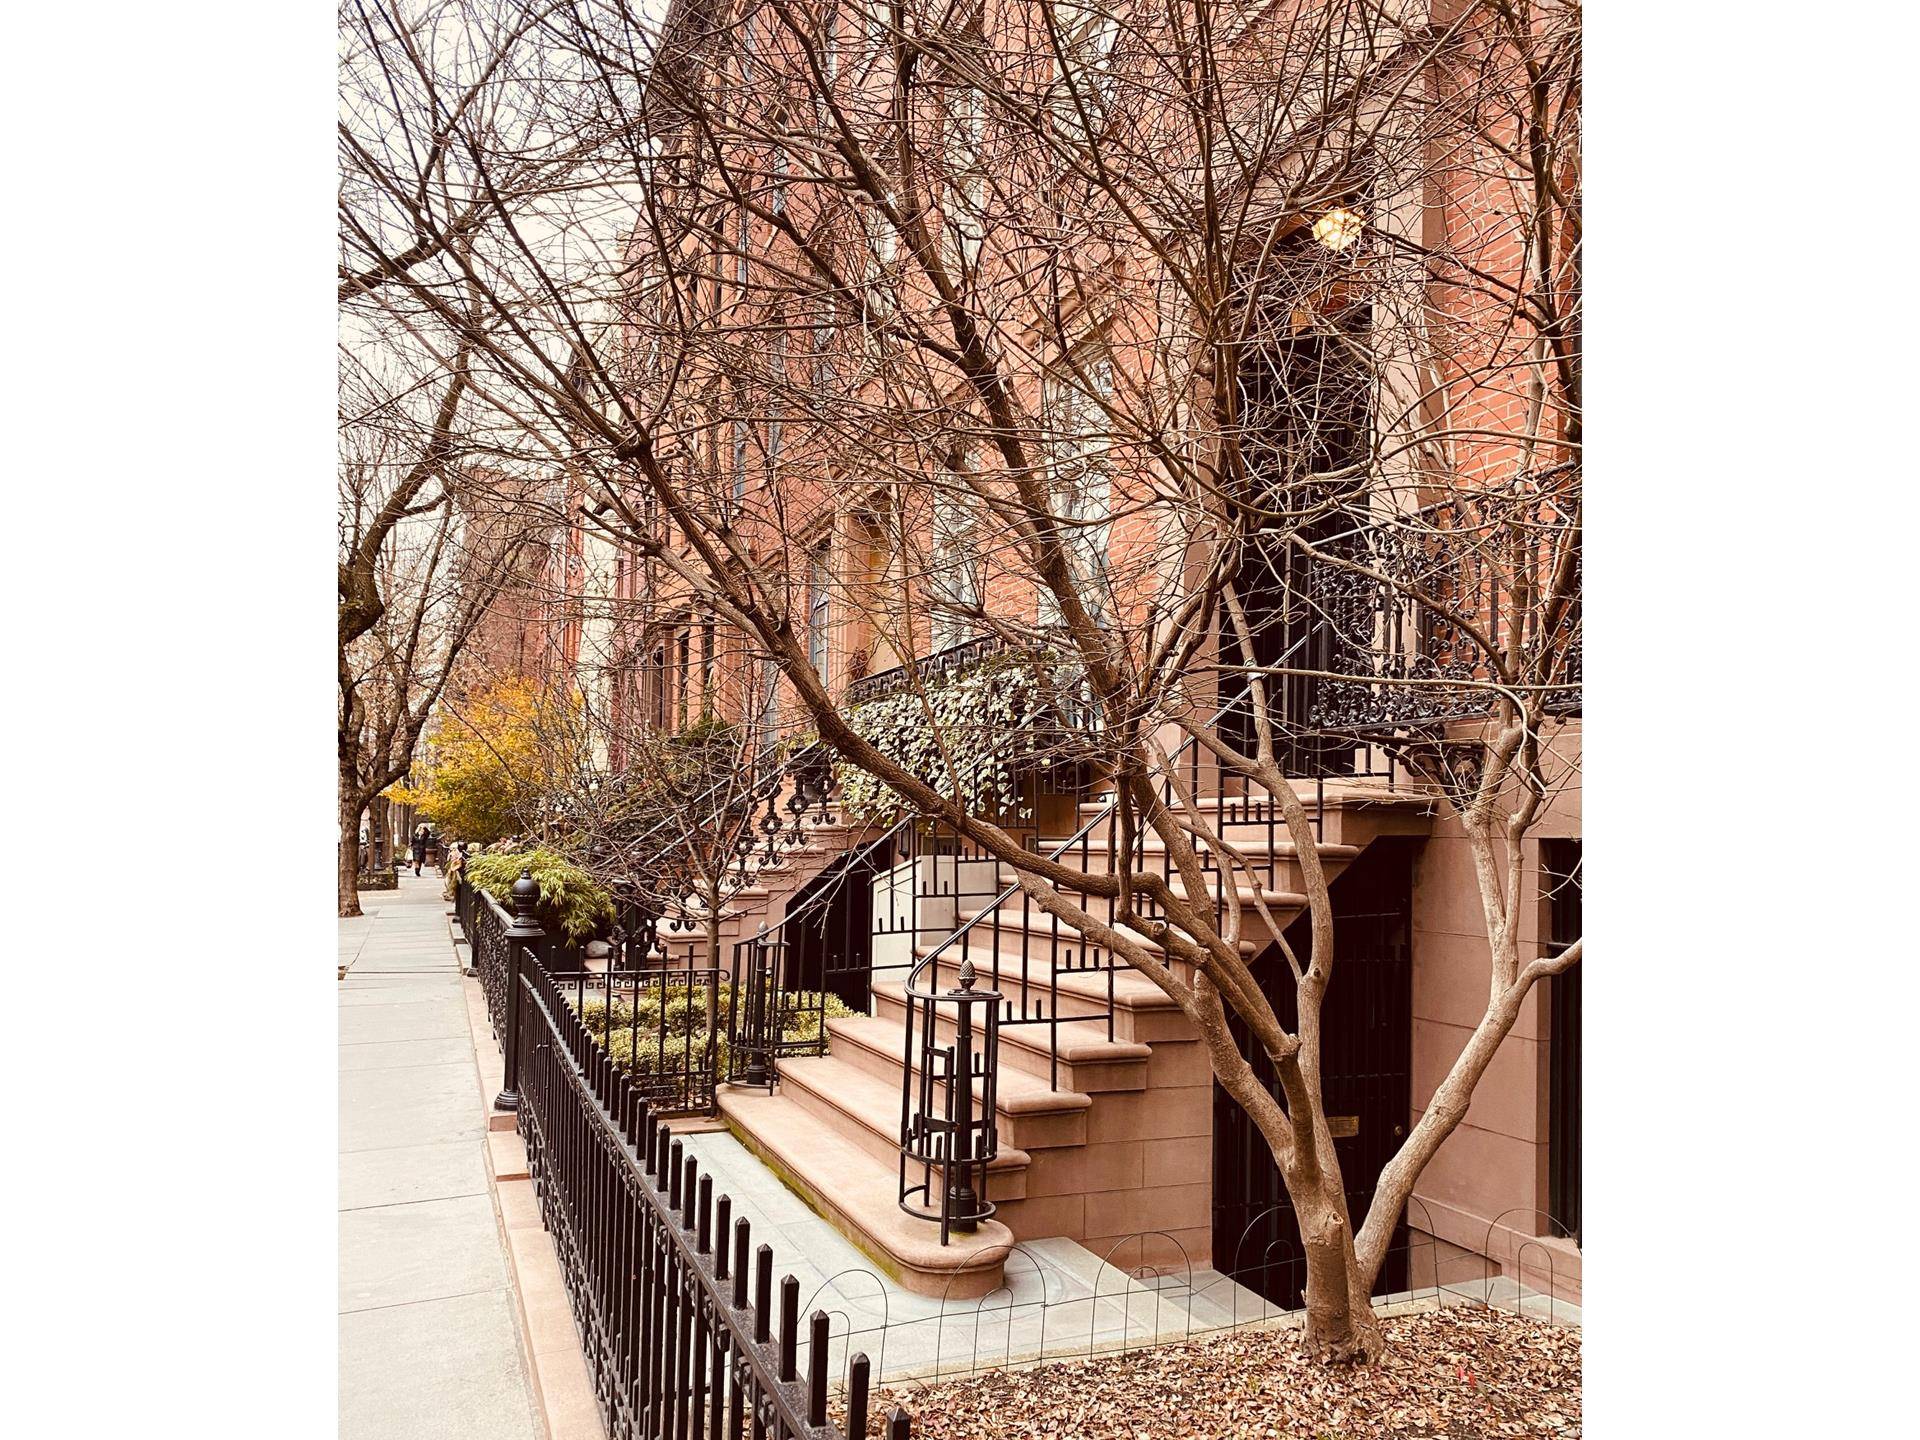 Grand Beauty ! Located on the most desirable tree lined street in the West Village, this magnificent 24 foot wide five story Greek Revival townhouse offers everything one dreams of ...